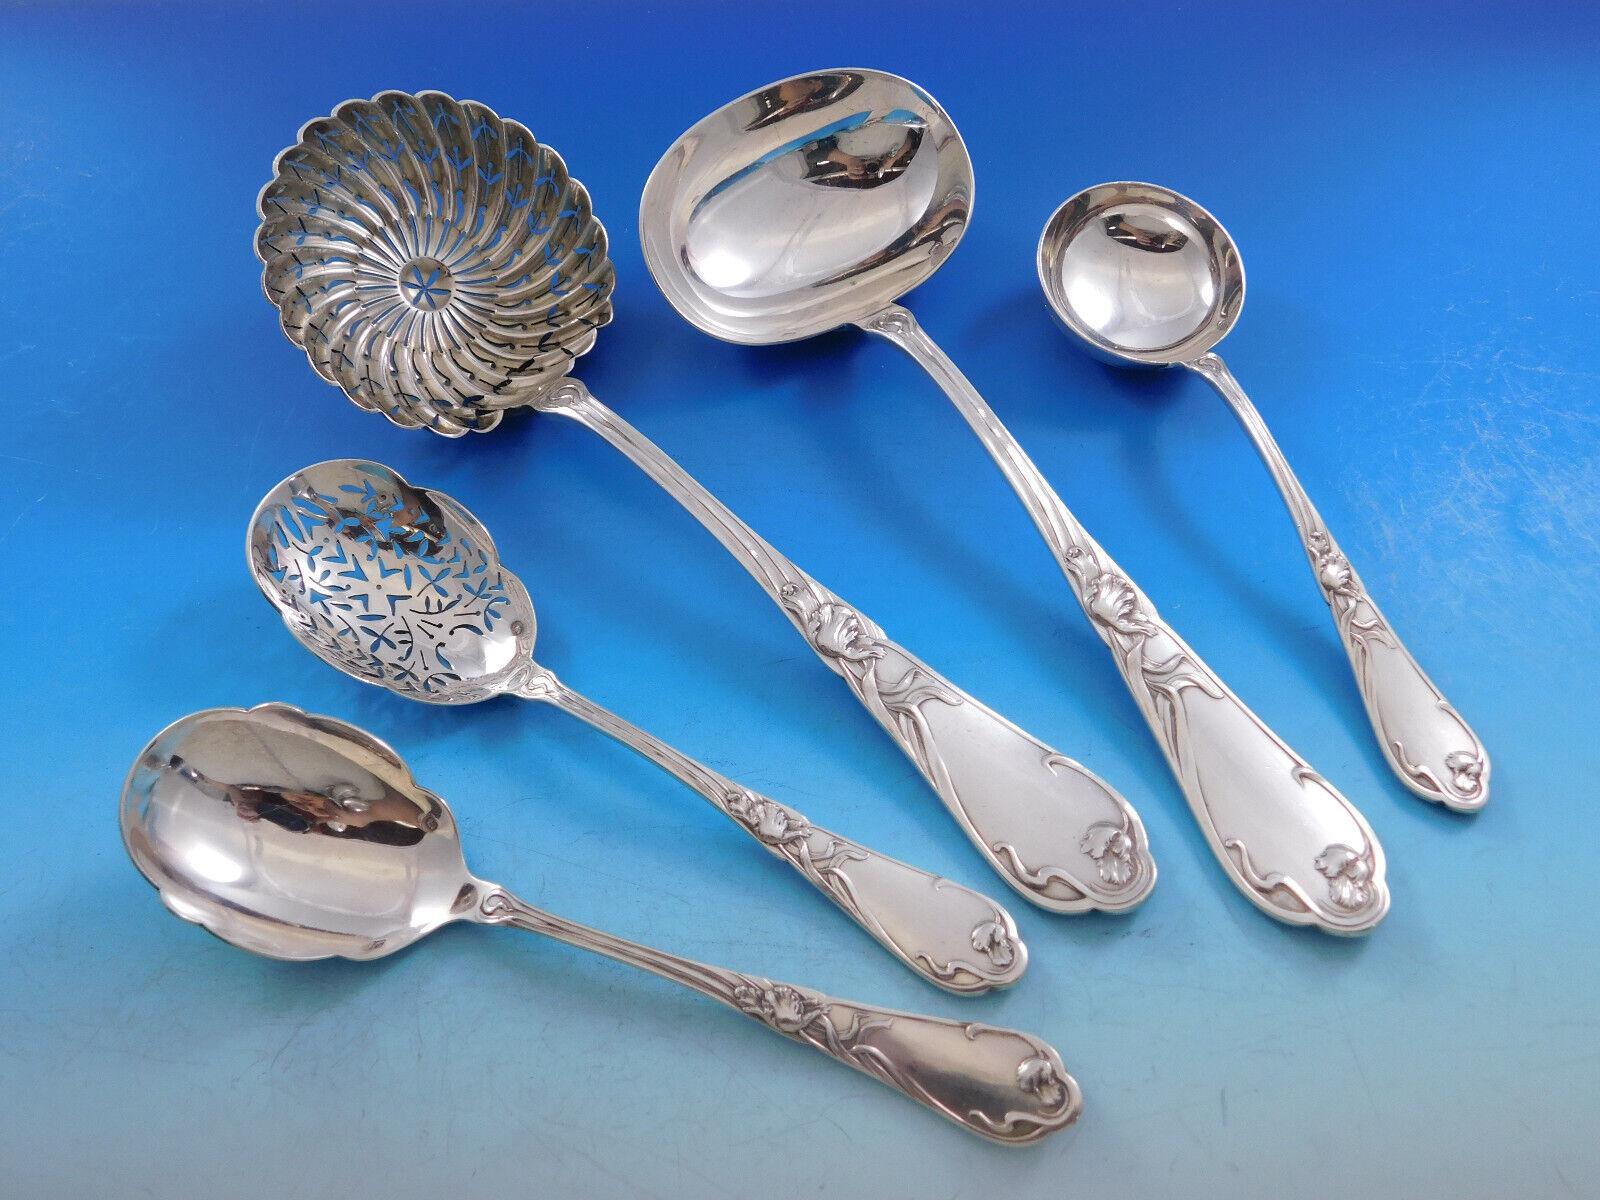 Tulipe Tulip by Boulenger French 950 Sterling Silver Flatware Service Set 214 pc For Sale 2